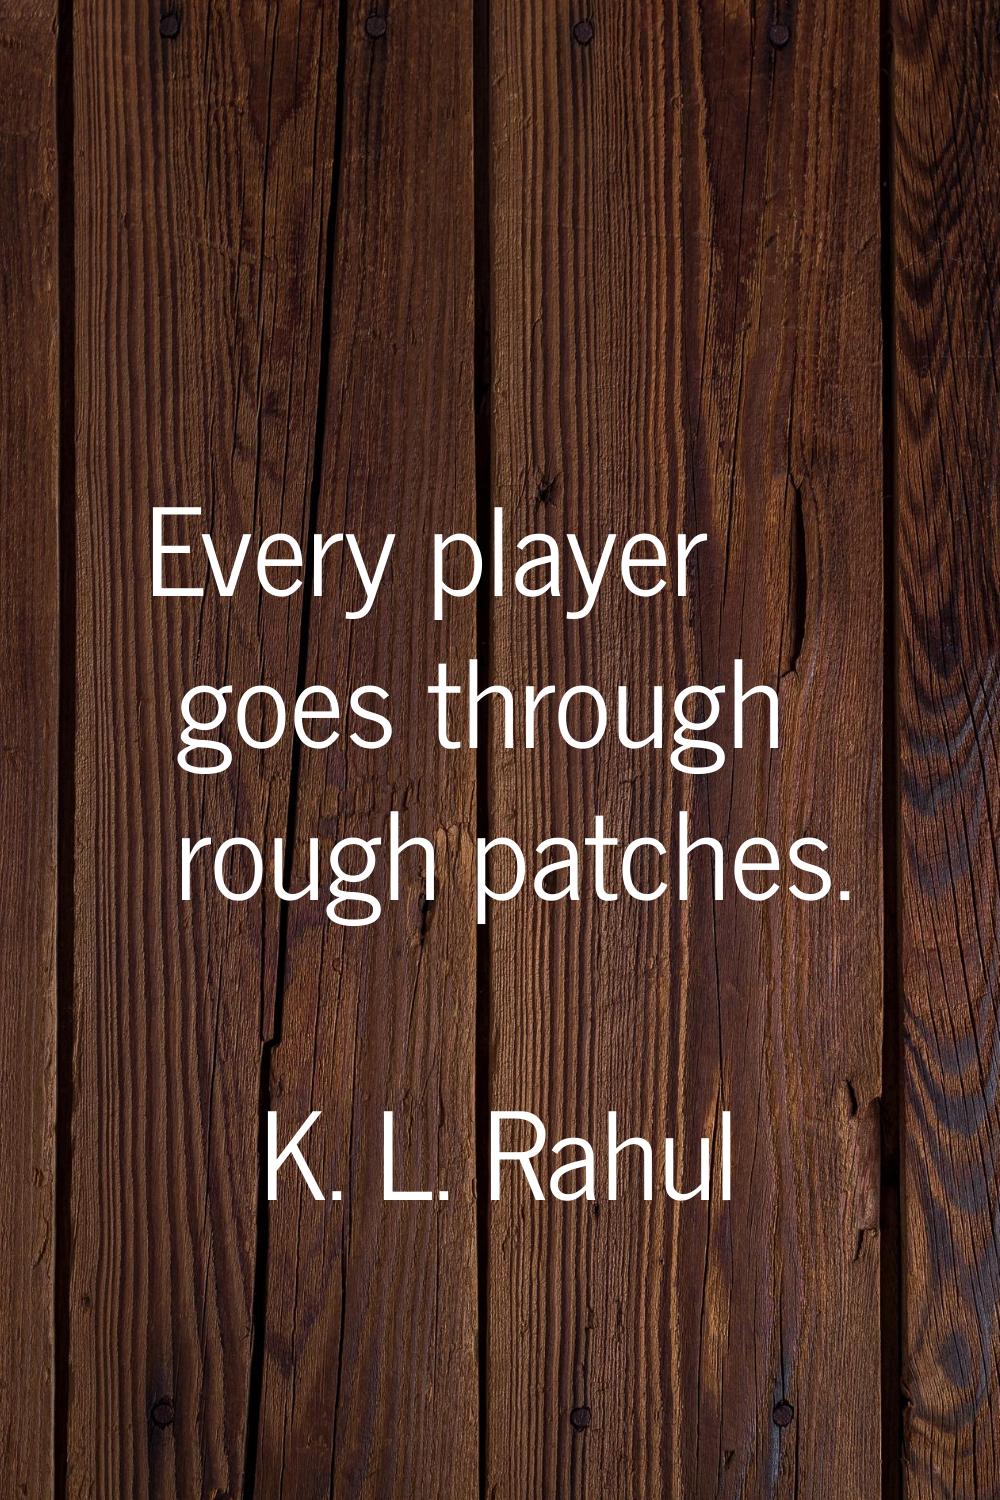 Every player goes through rough patches.